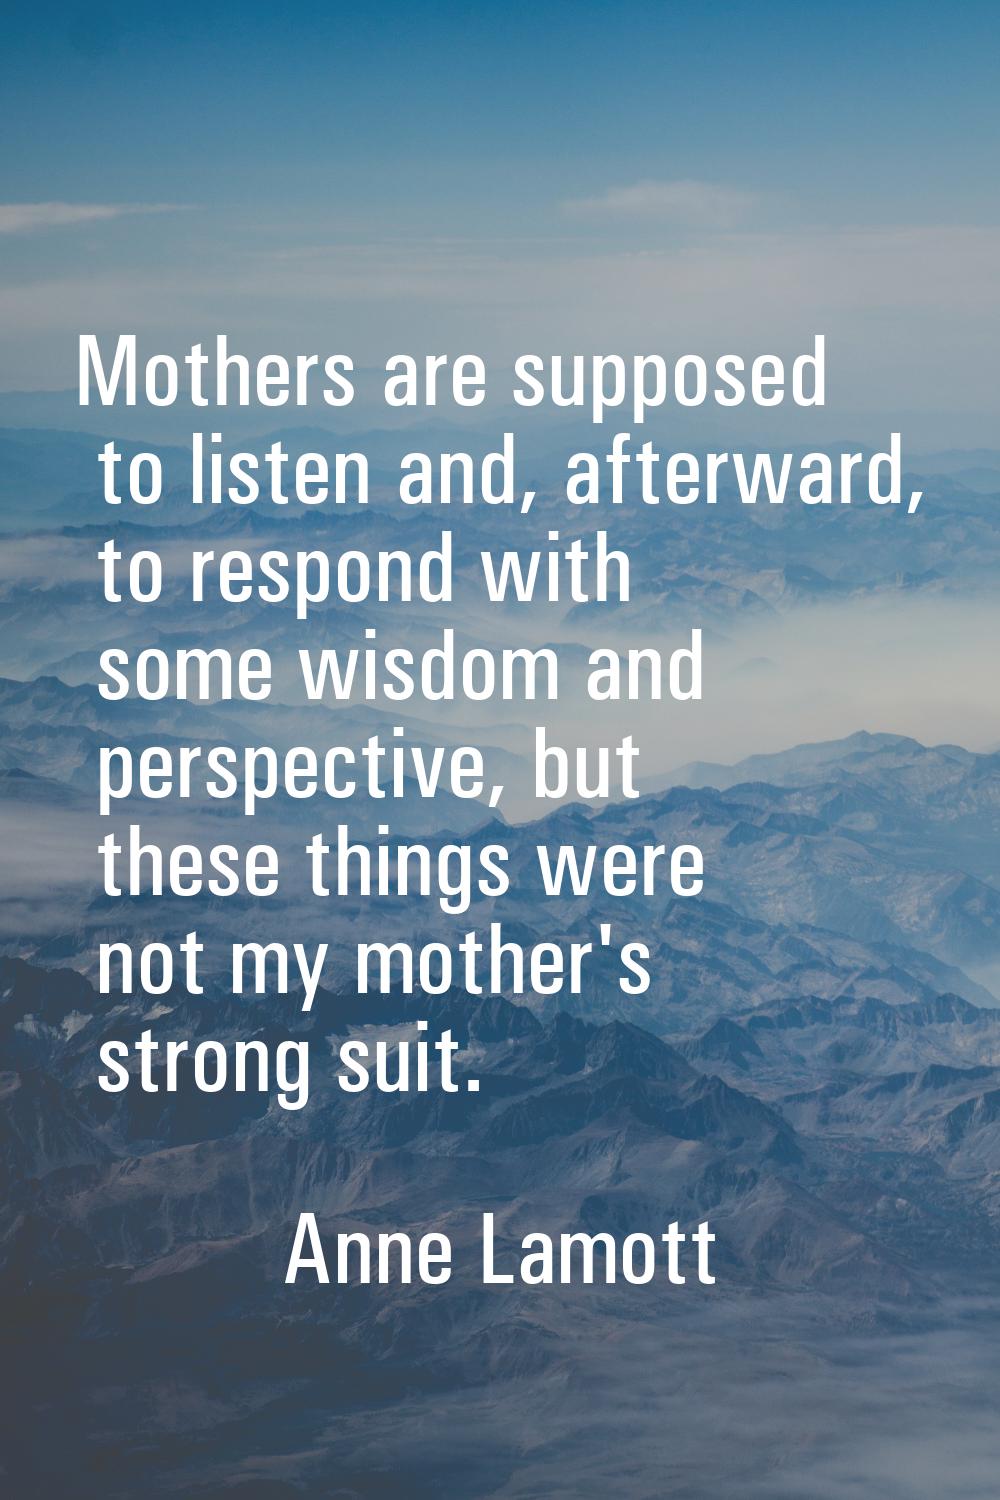 Mothers are supposed to listen and, afterward, to respond with some wisdom and perspective, but the